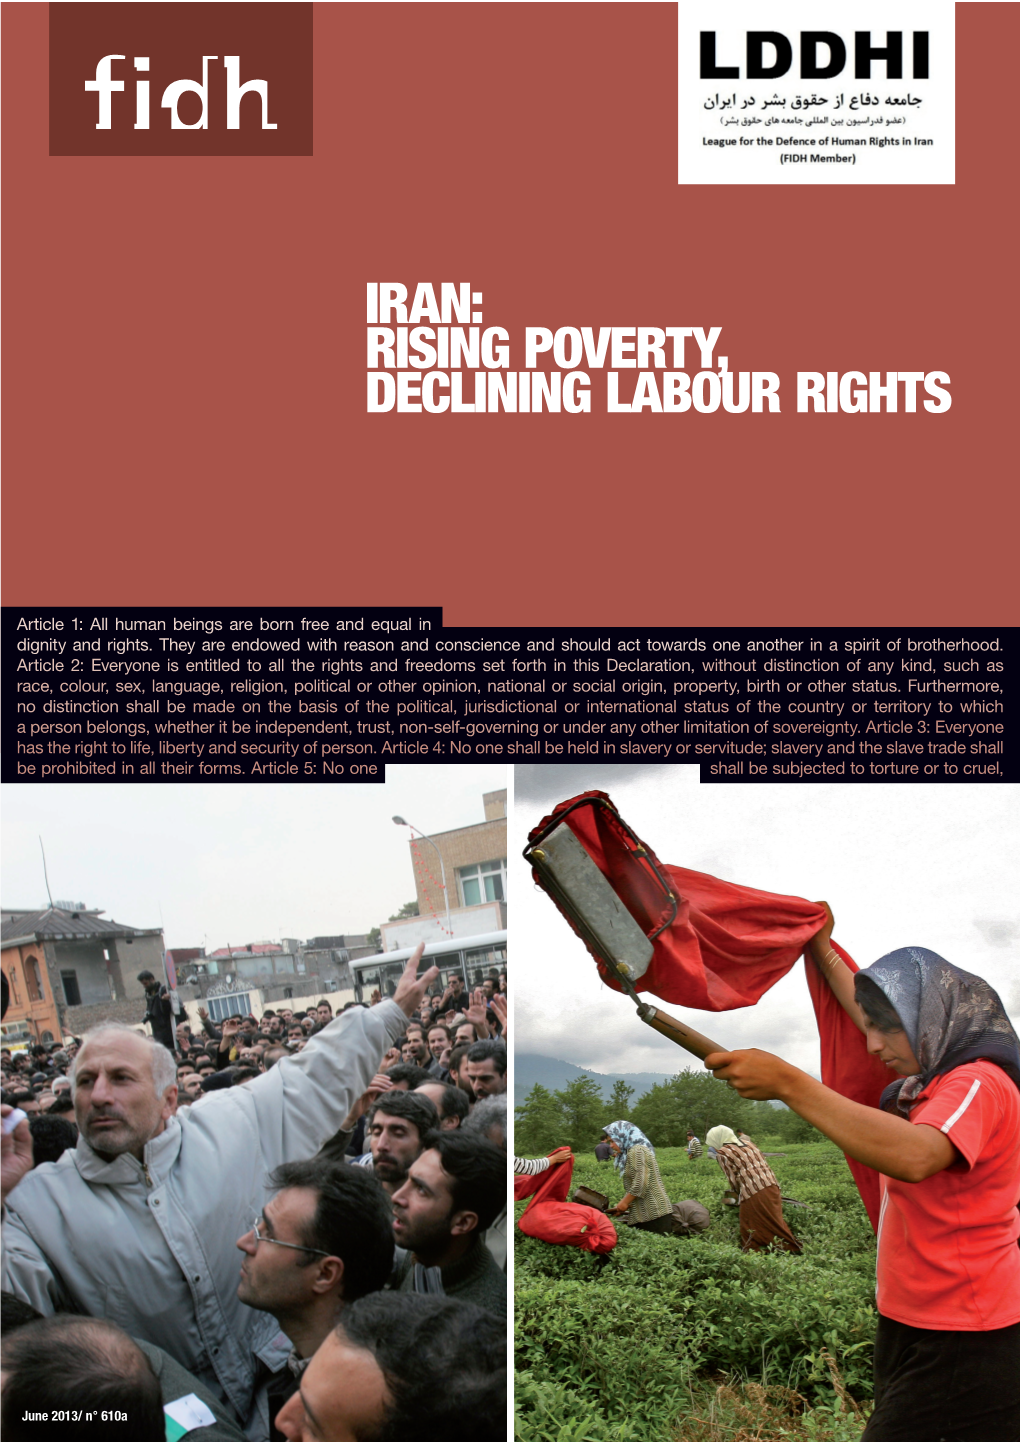 Iran: Rising Poverty, Declining Labour Rights